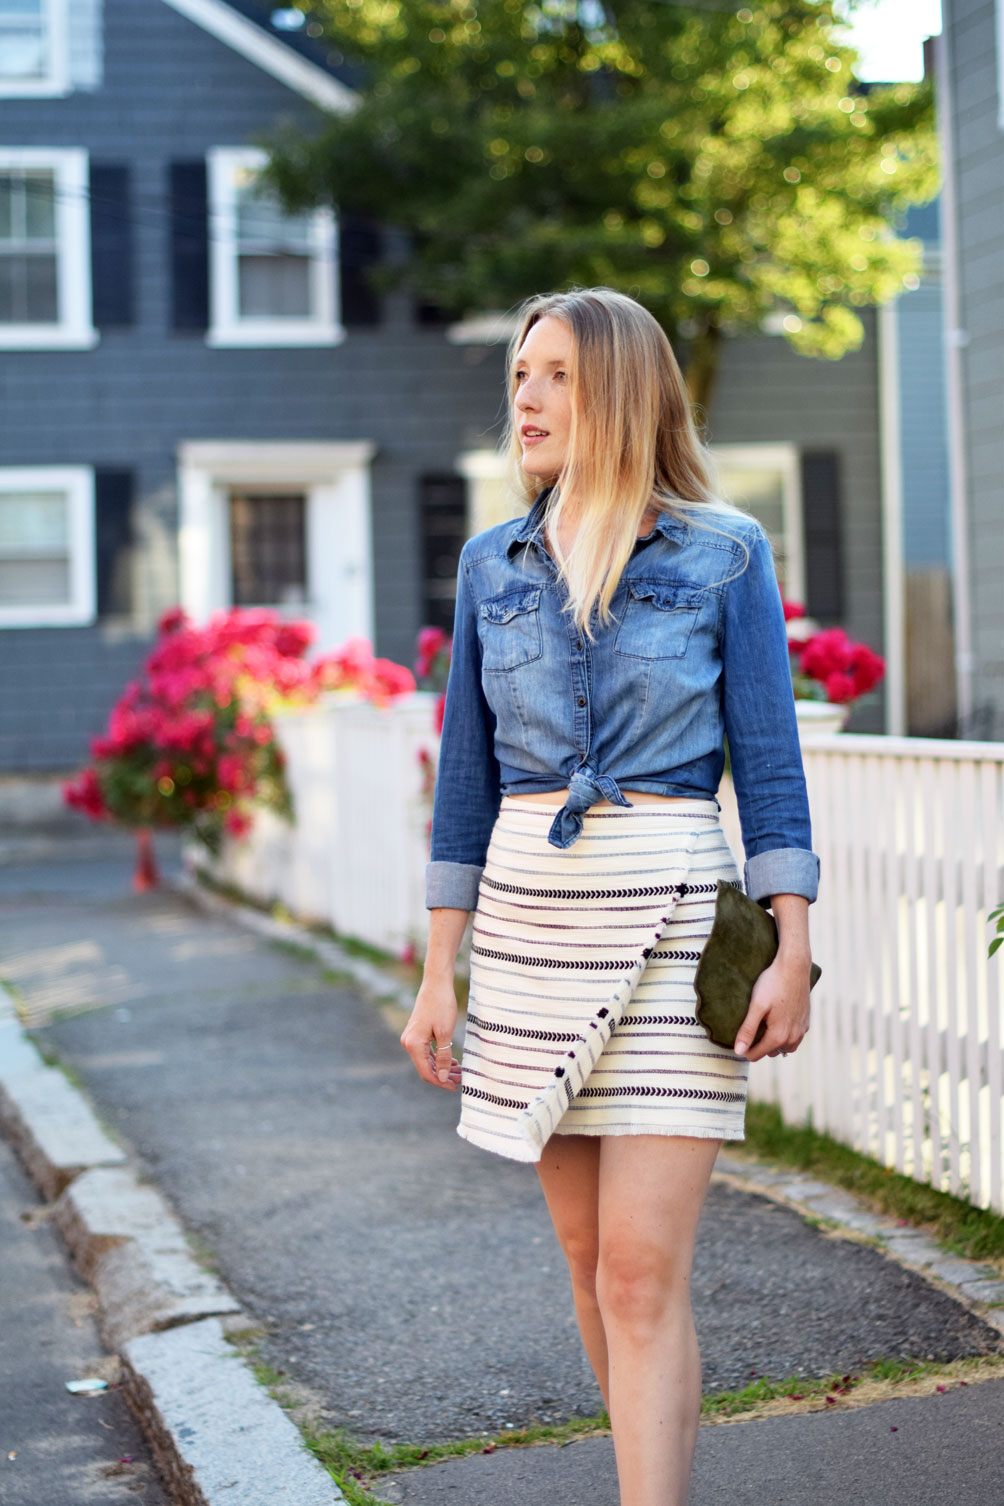 fashion blogger Leslie Musser of one brass fox wears a summer date night look of this chambray shirt, striped fringe wrap skirt, and suede mules